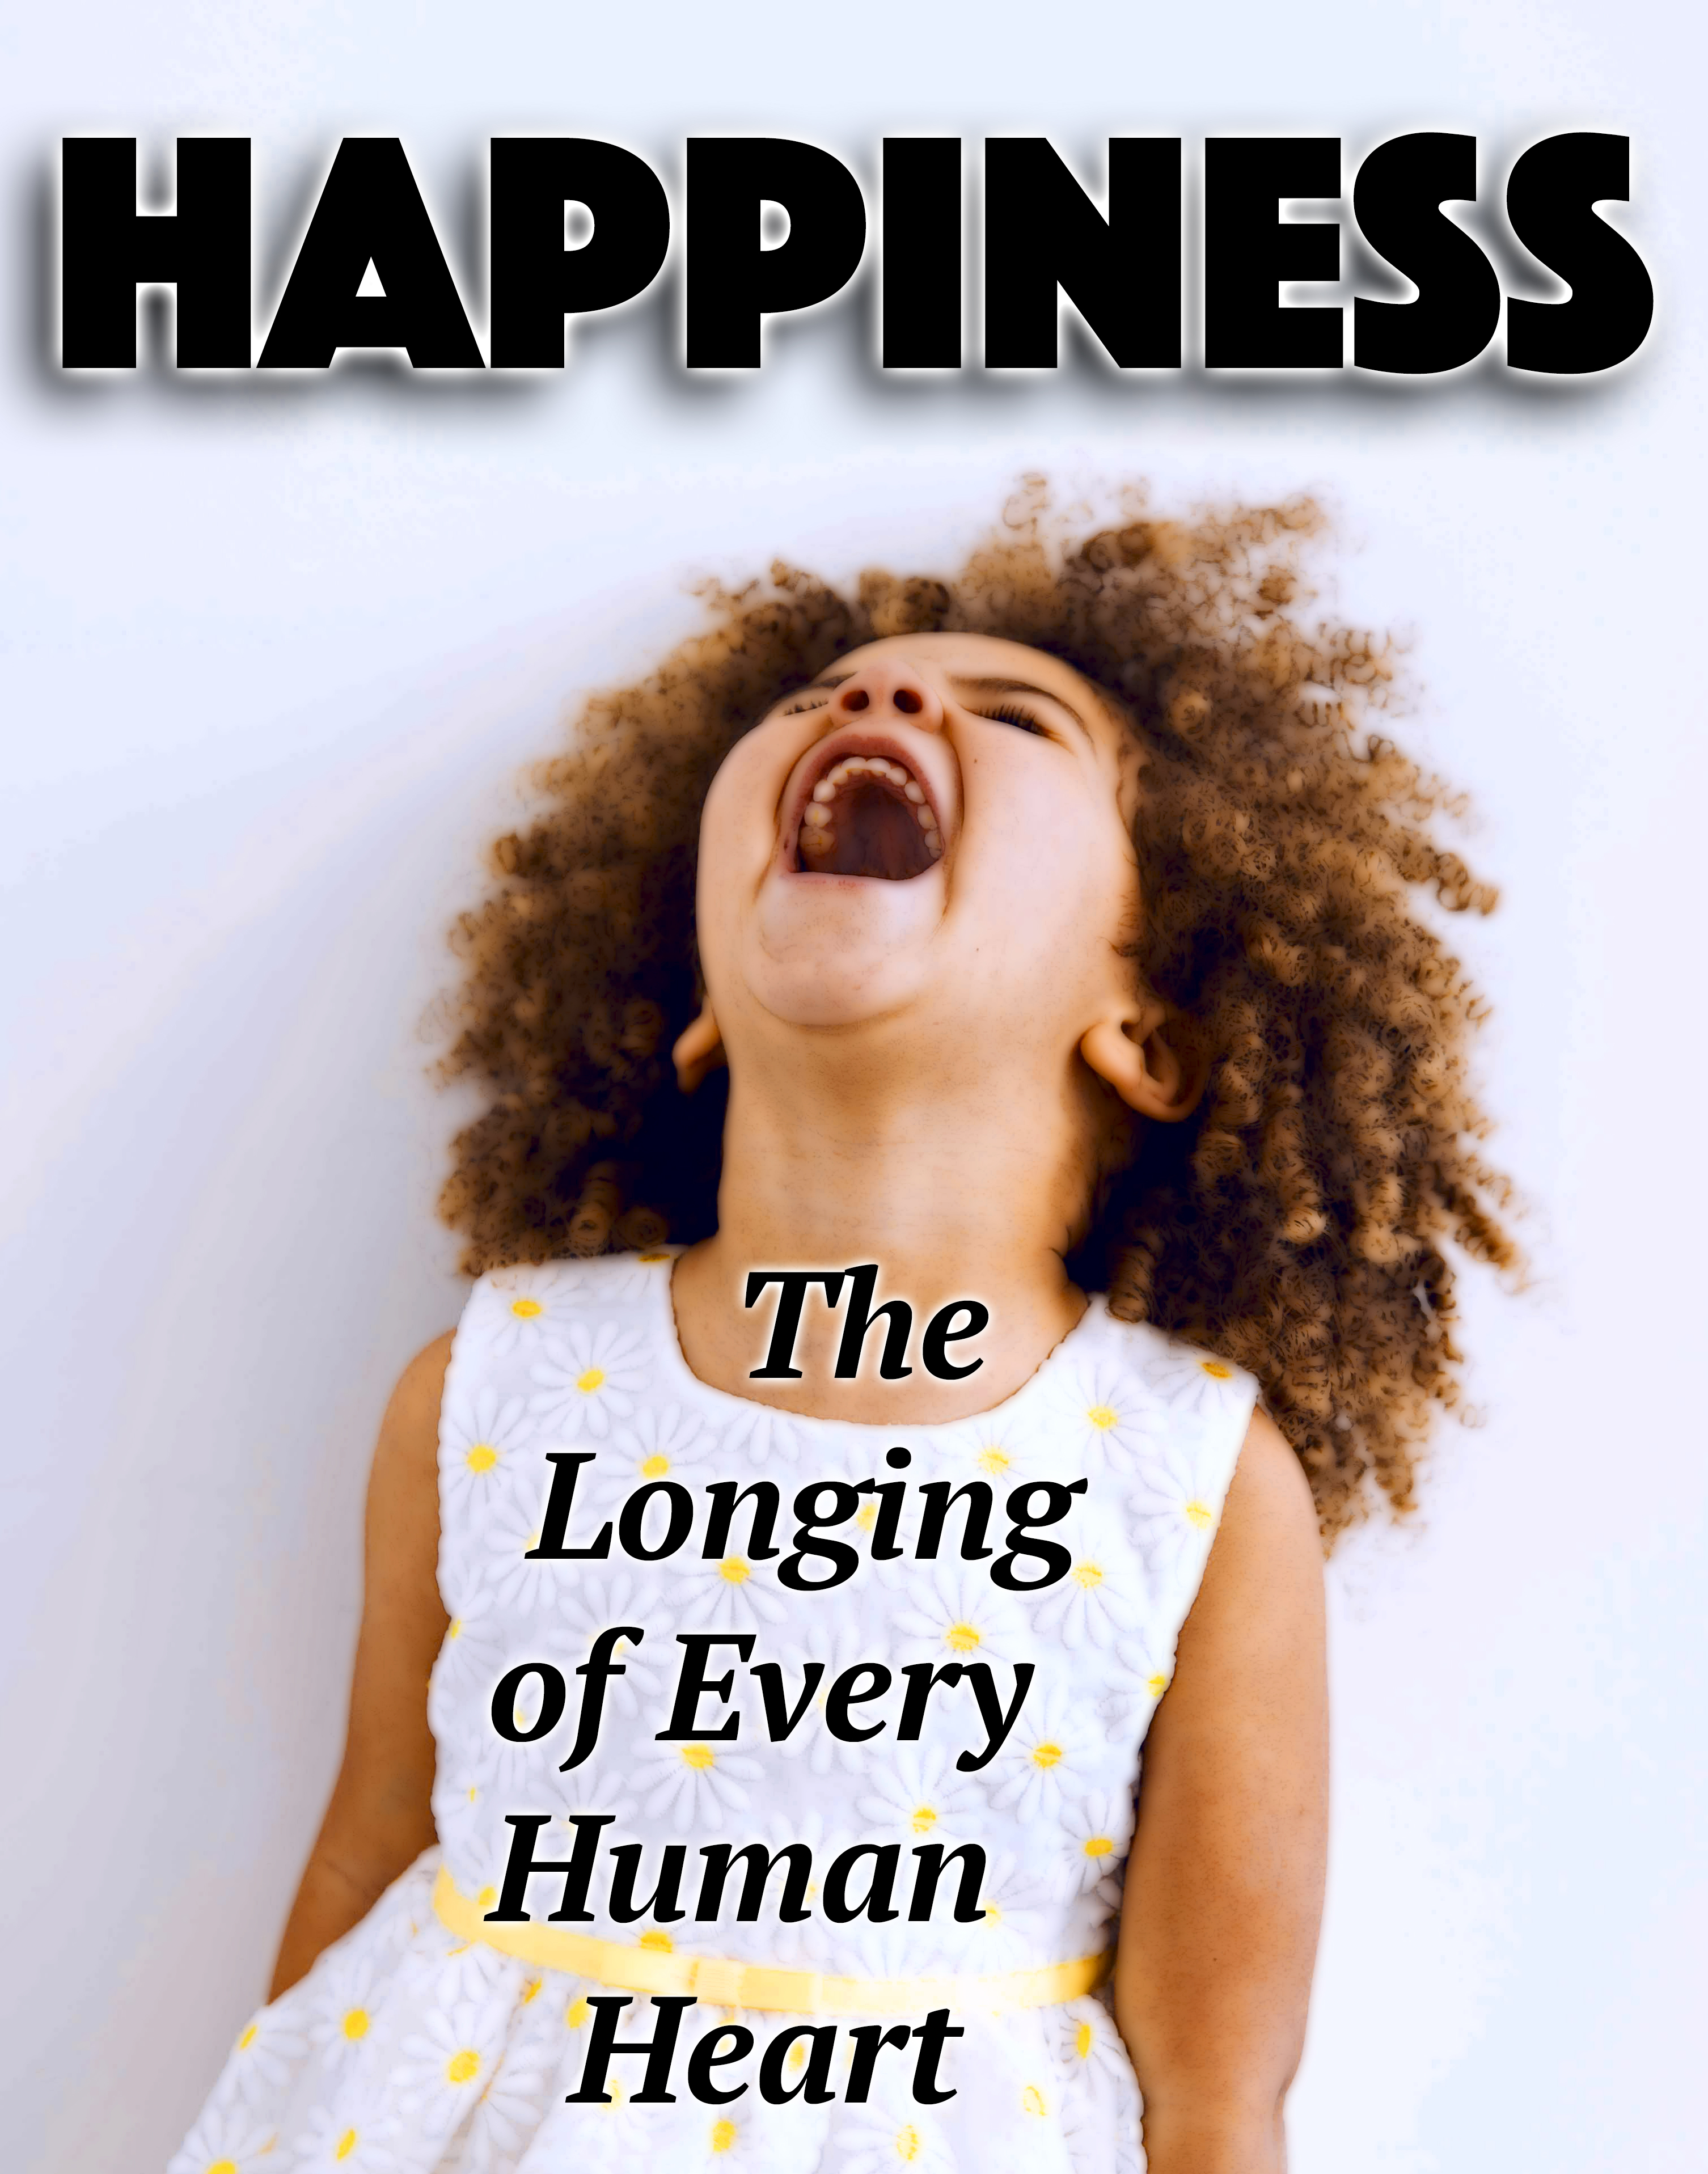 Happiness: The Longing of Every Human Heart banner